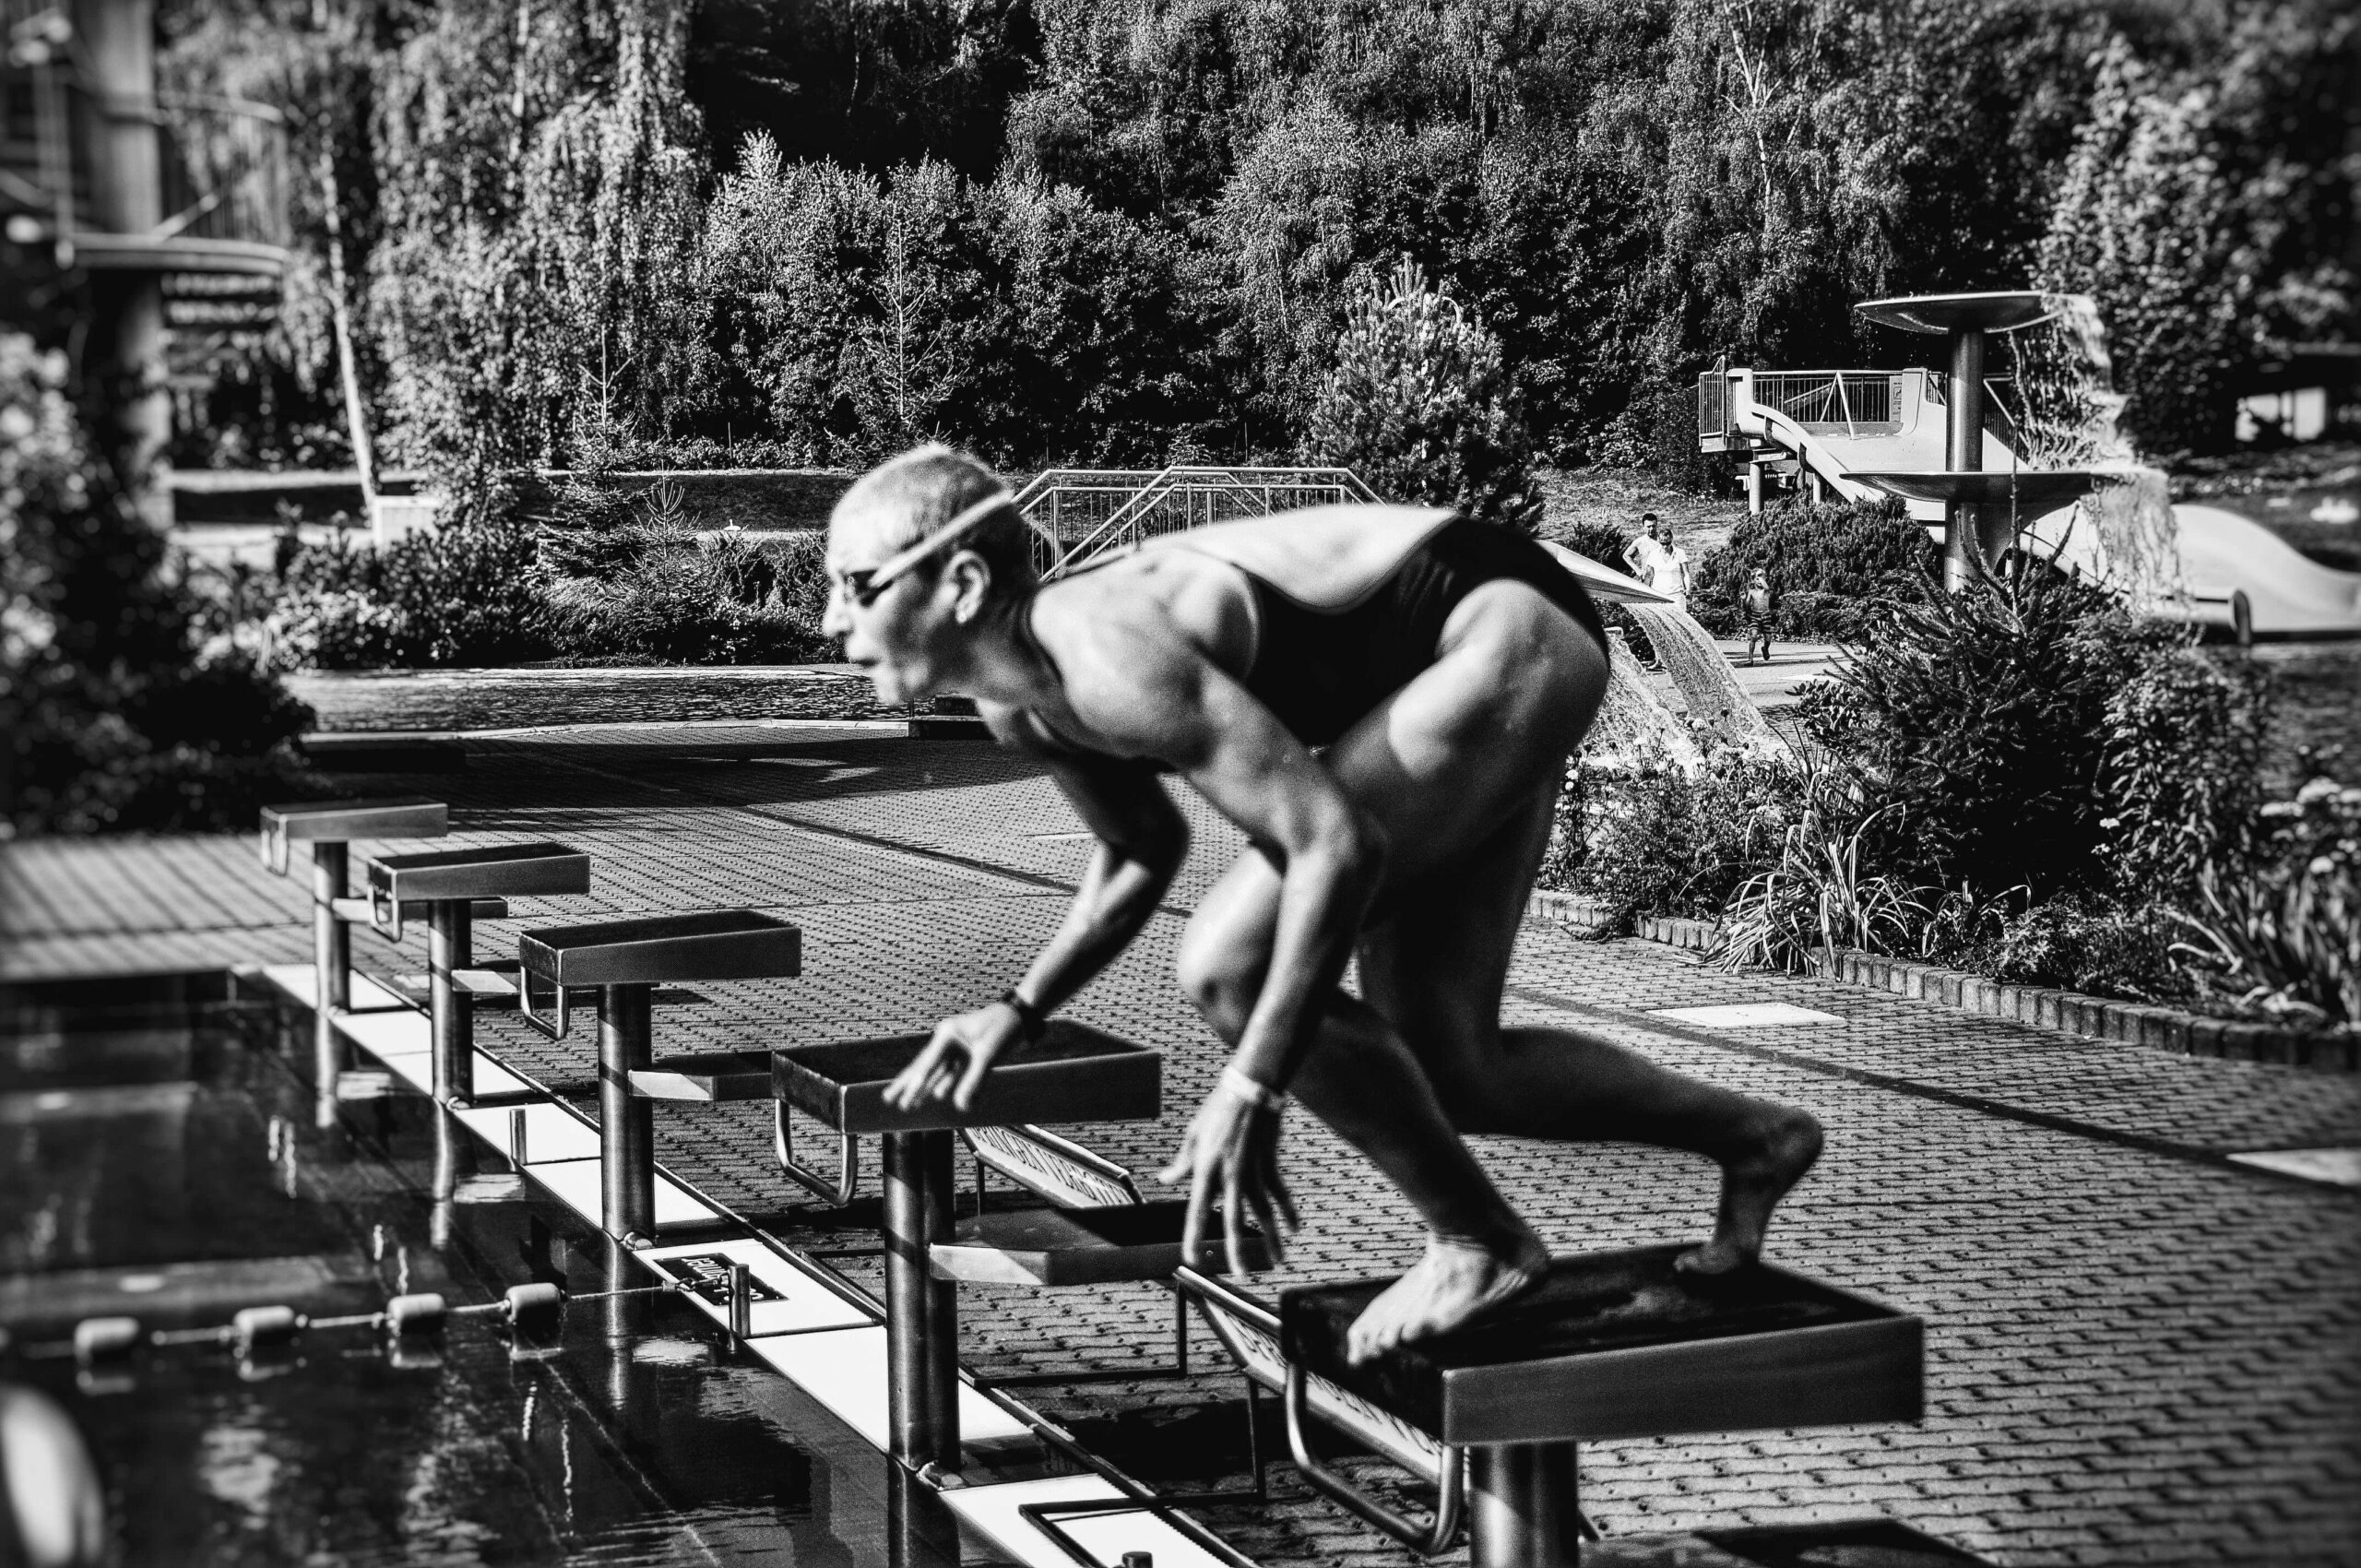 swimmer jumping into pool